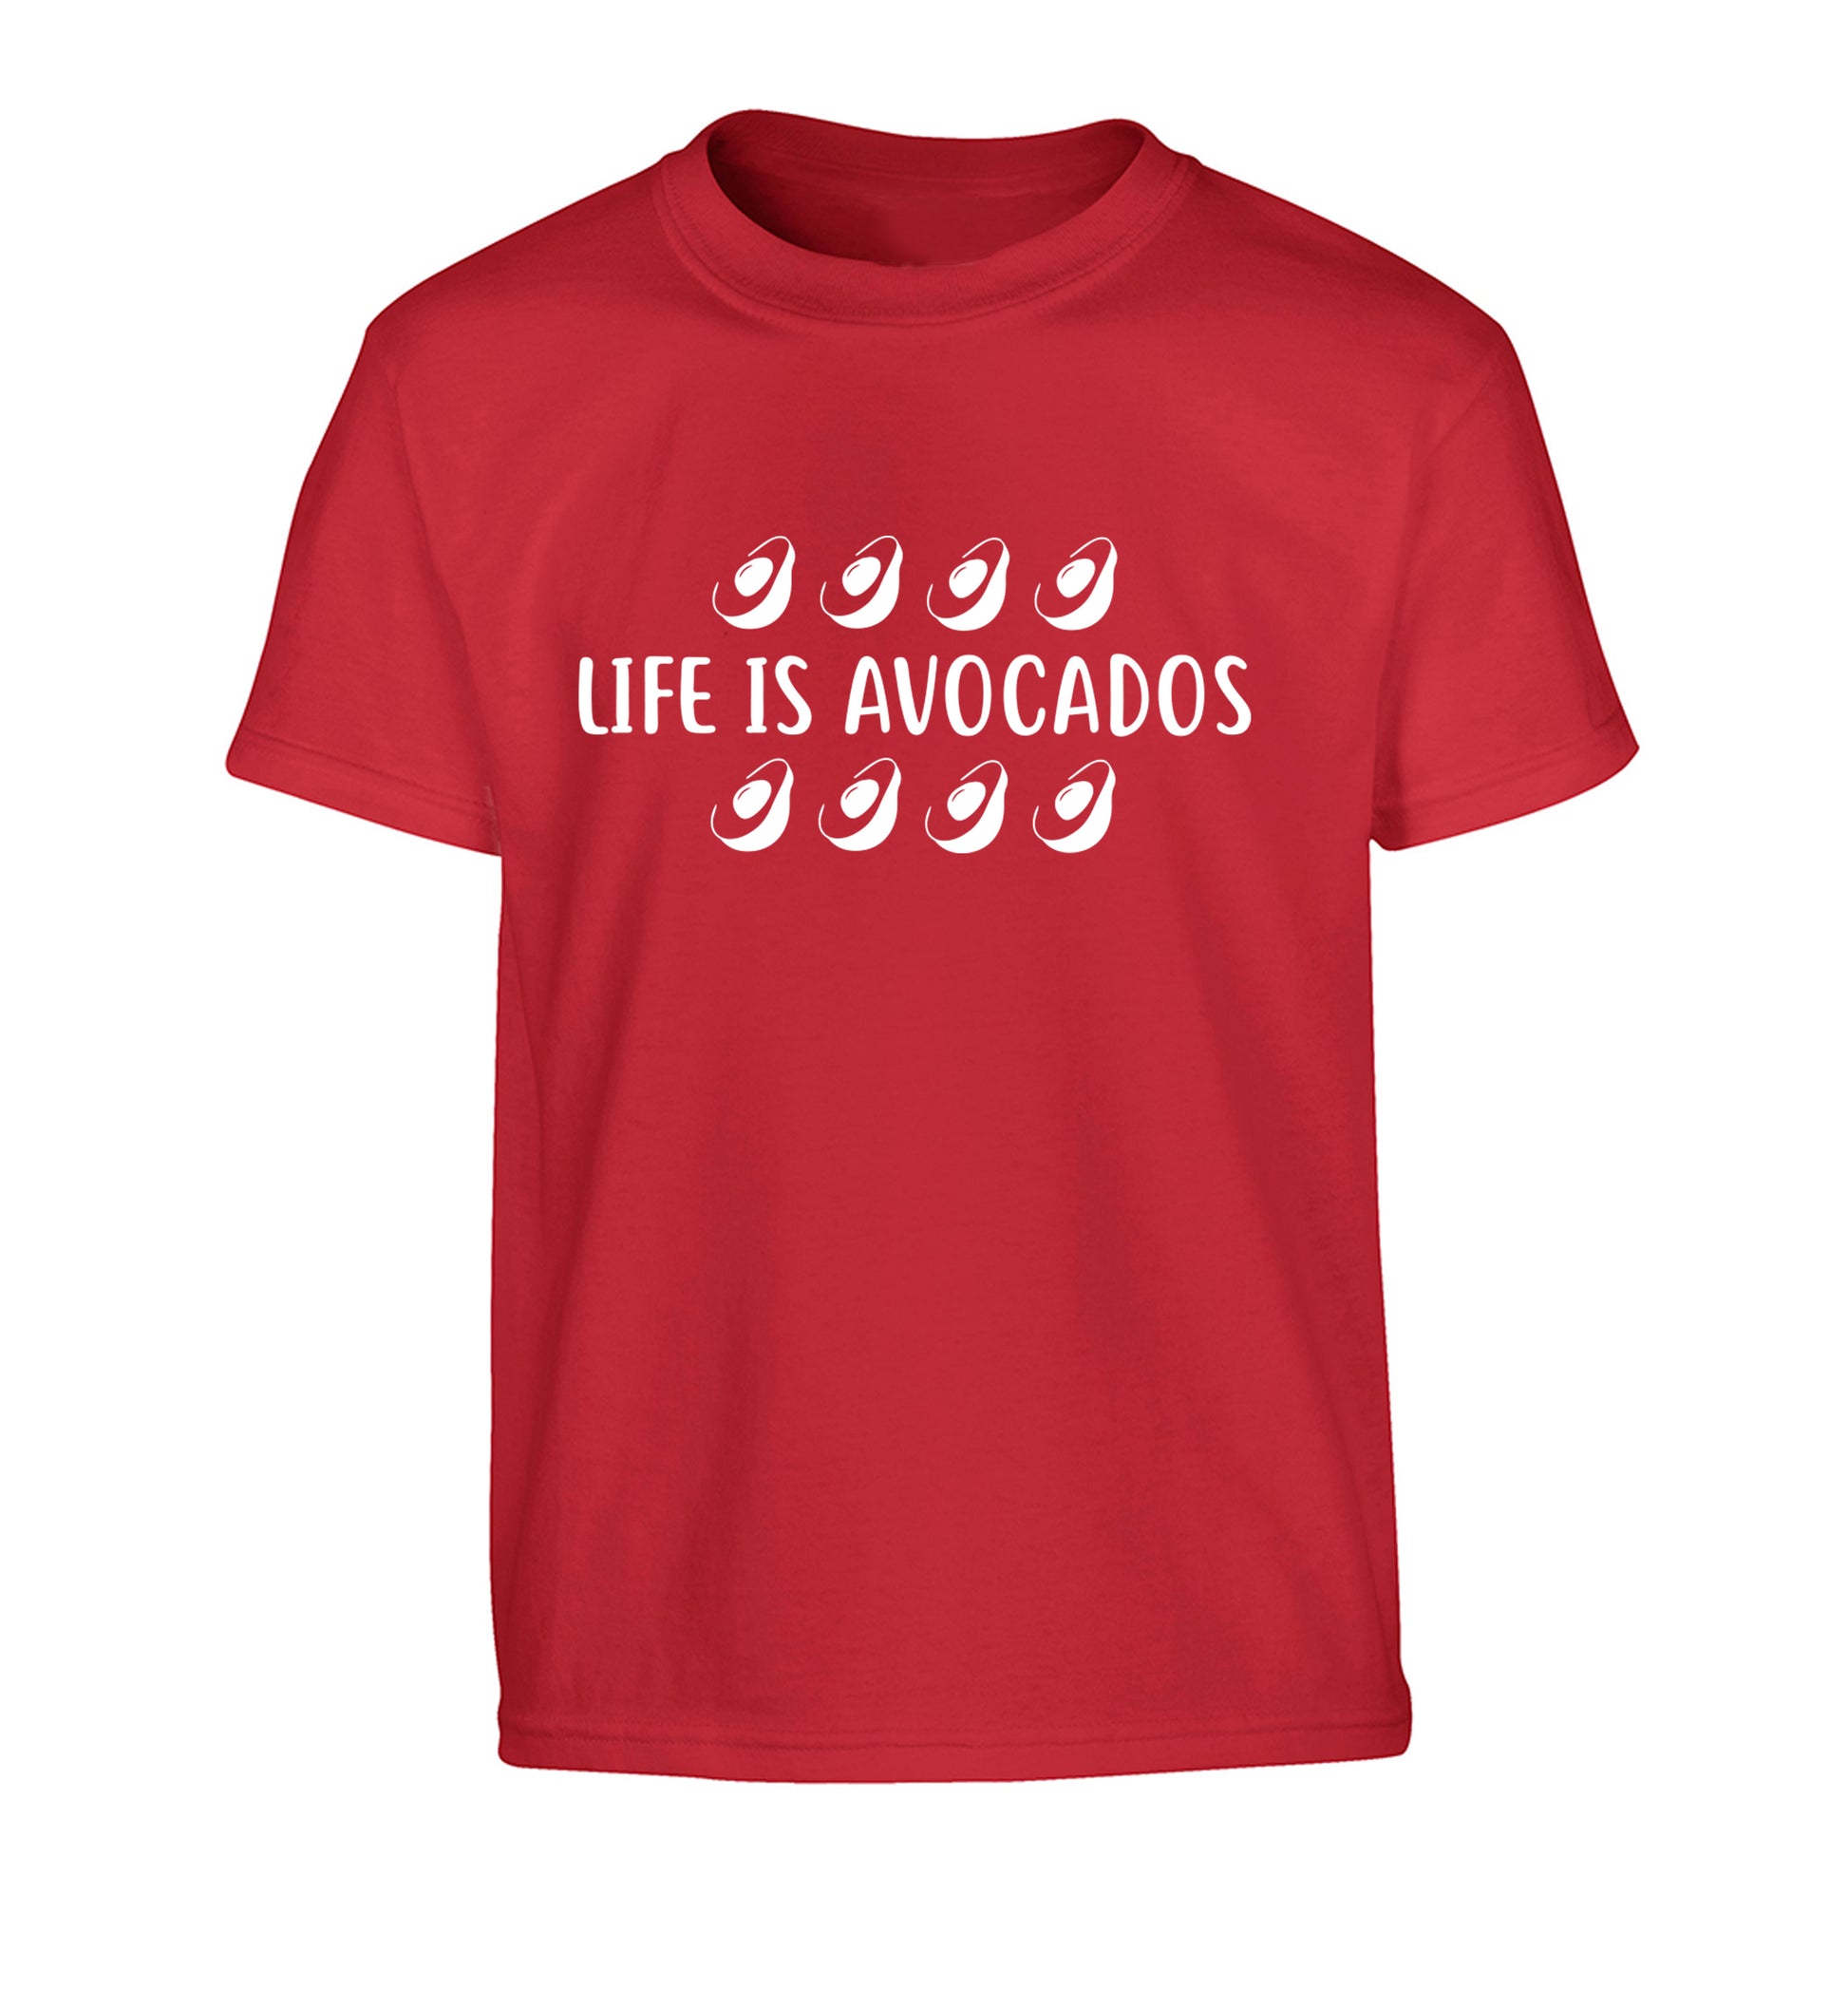 Life is avocados Children's red Tshirt 12-14 Years